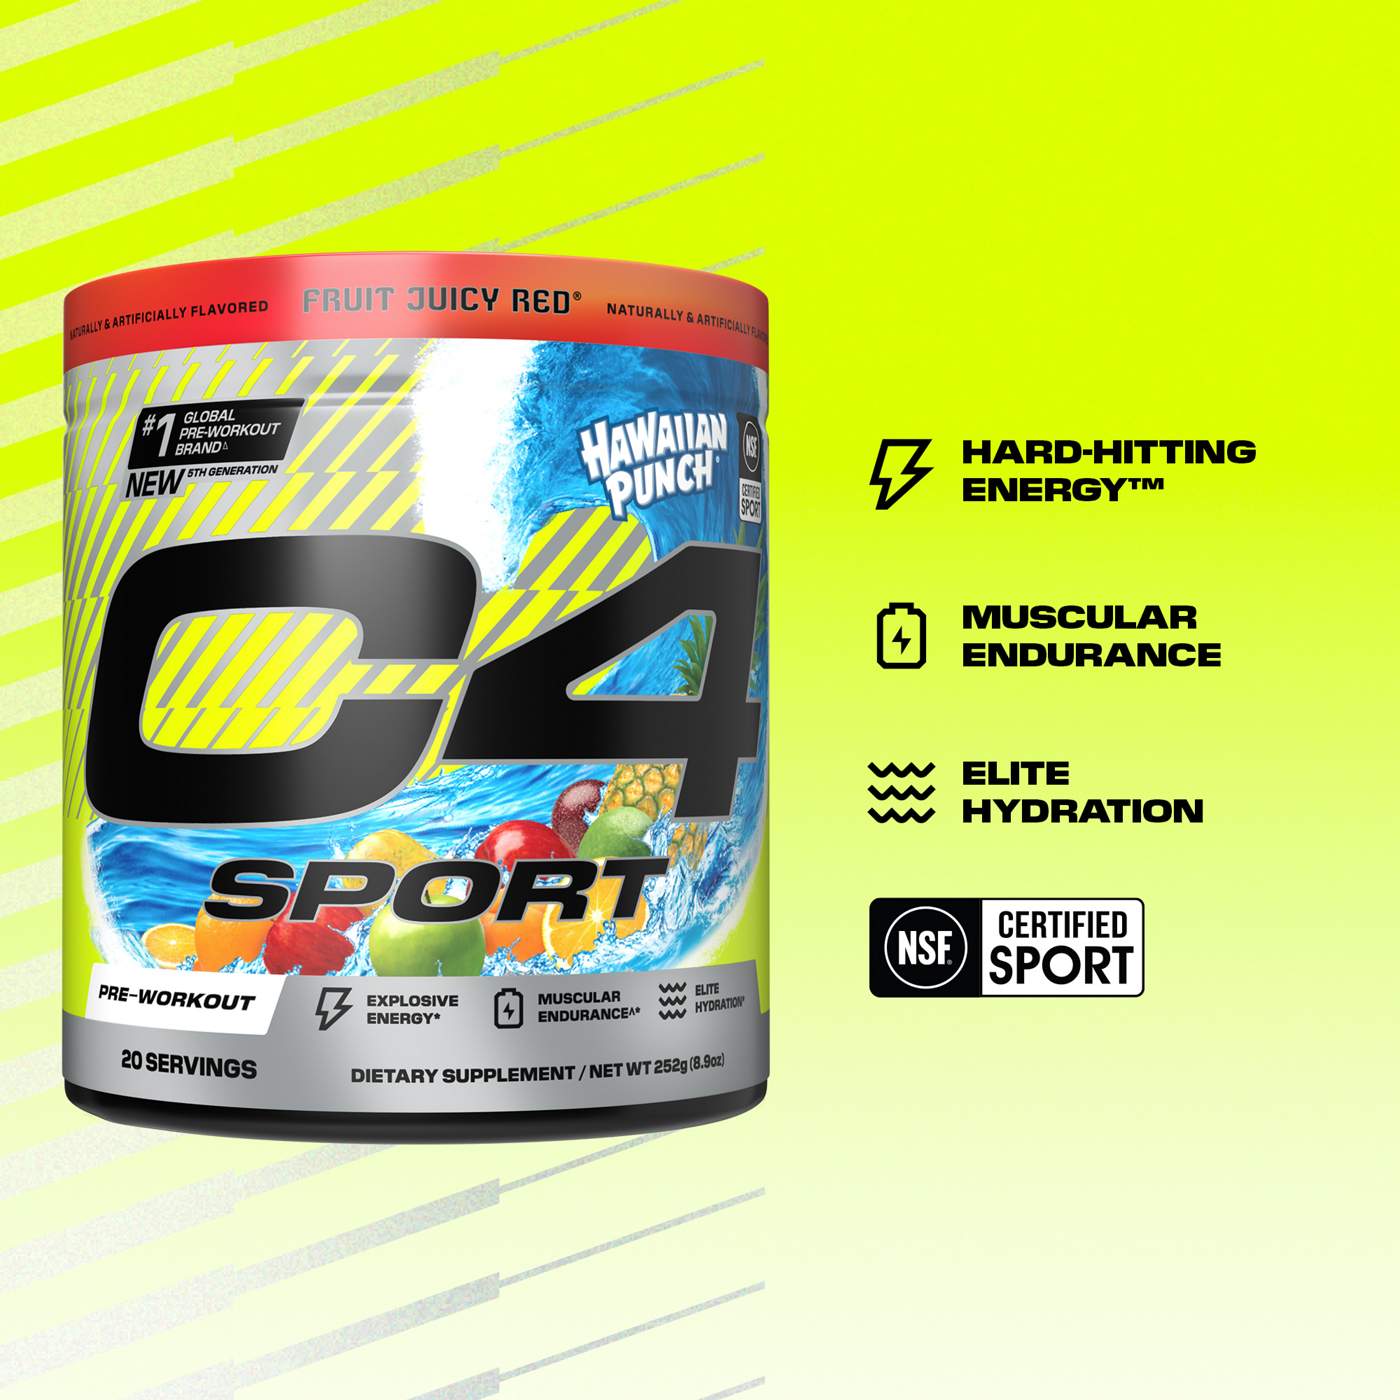 Cellucor C4 Sport Pre-Workout - Hawaiian Punch Fruit Juicy Red; image 5 of 12